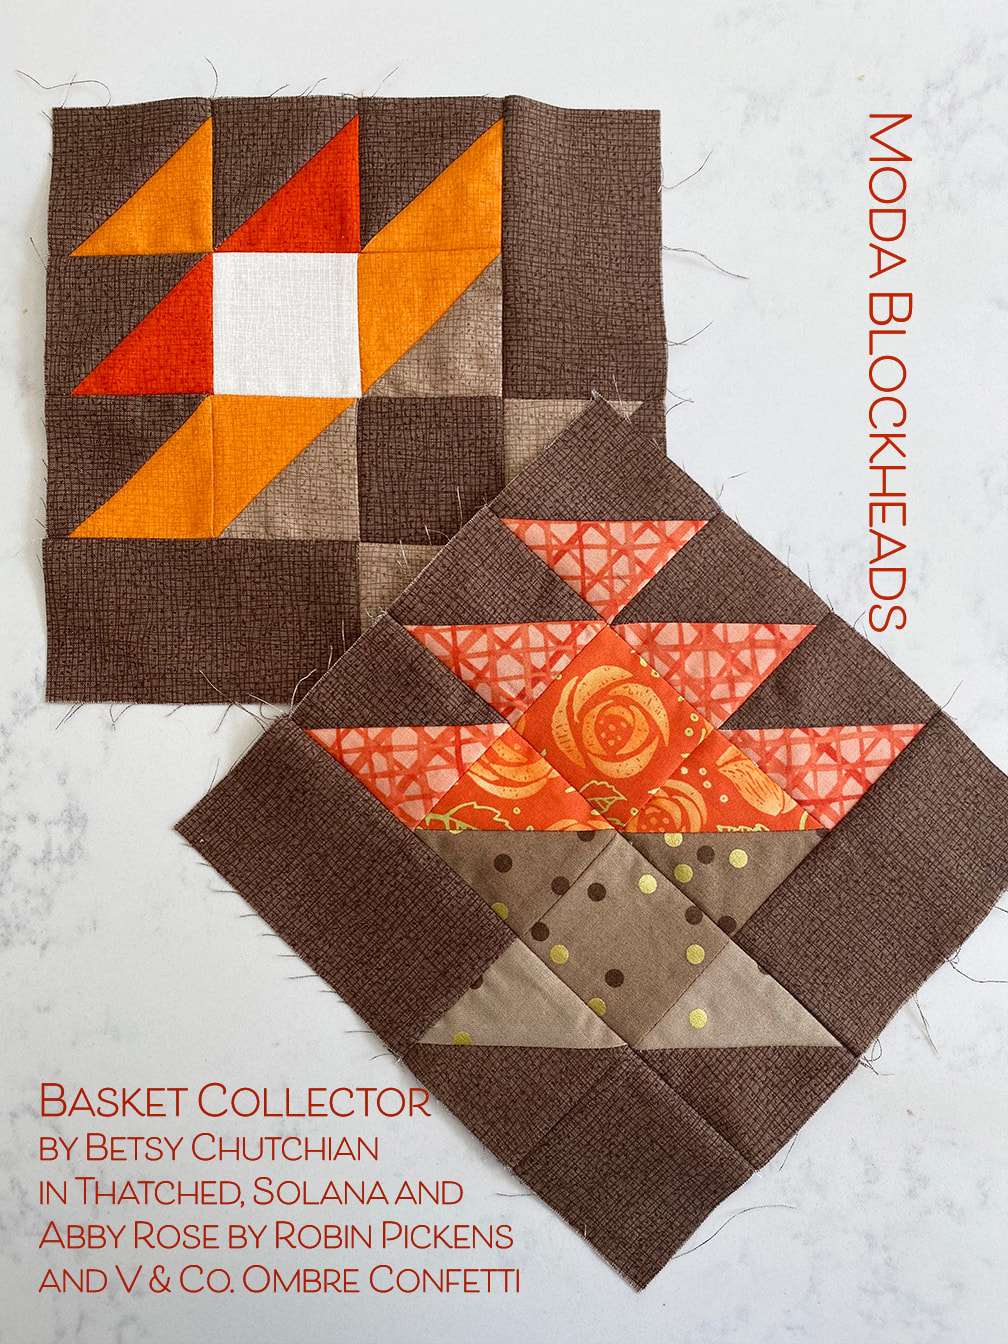 Basket Collector quilt block- Moda Blockheads from Betsy Chutchian done in Robin Pickens fabrics